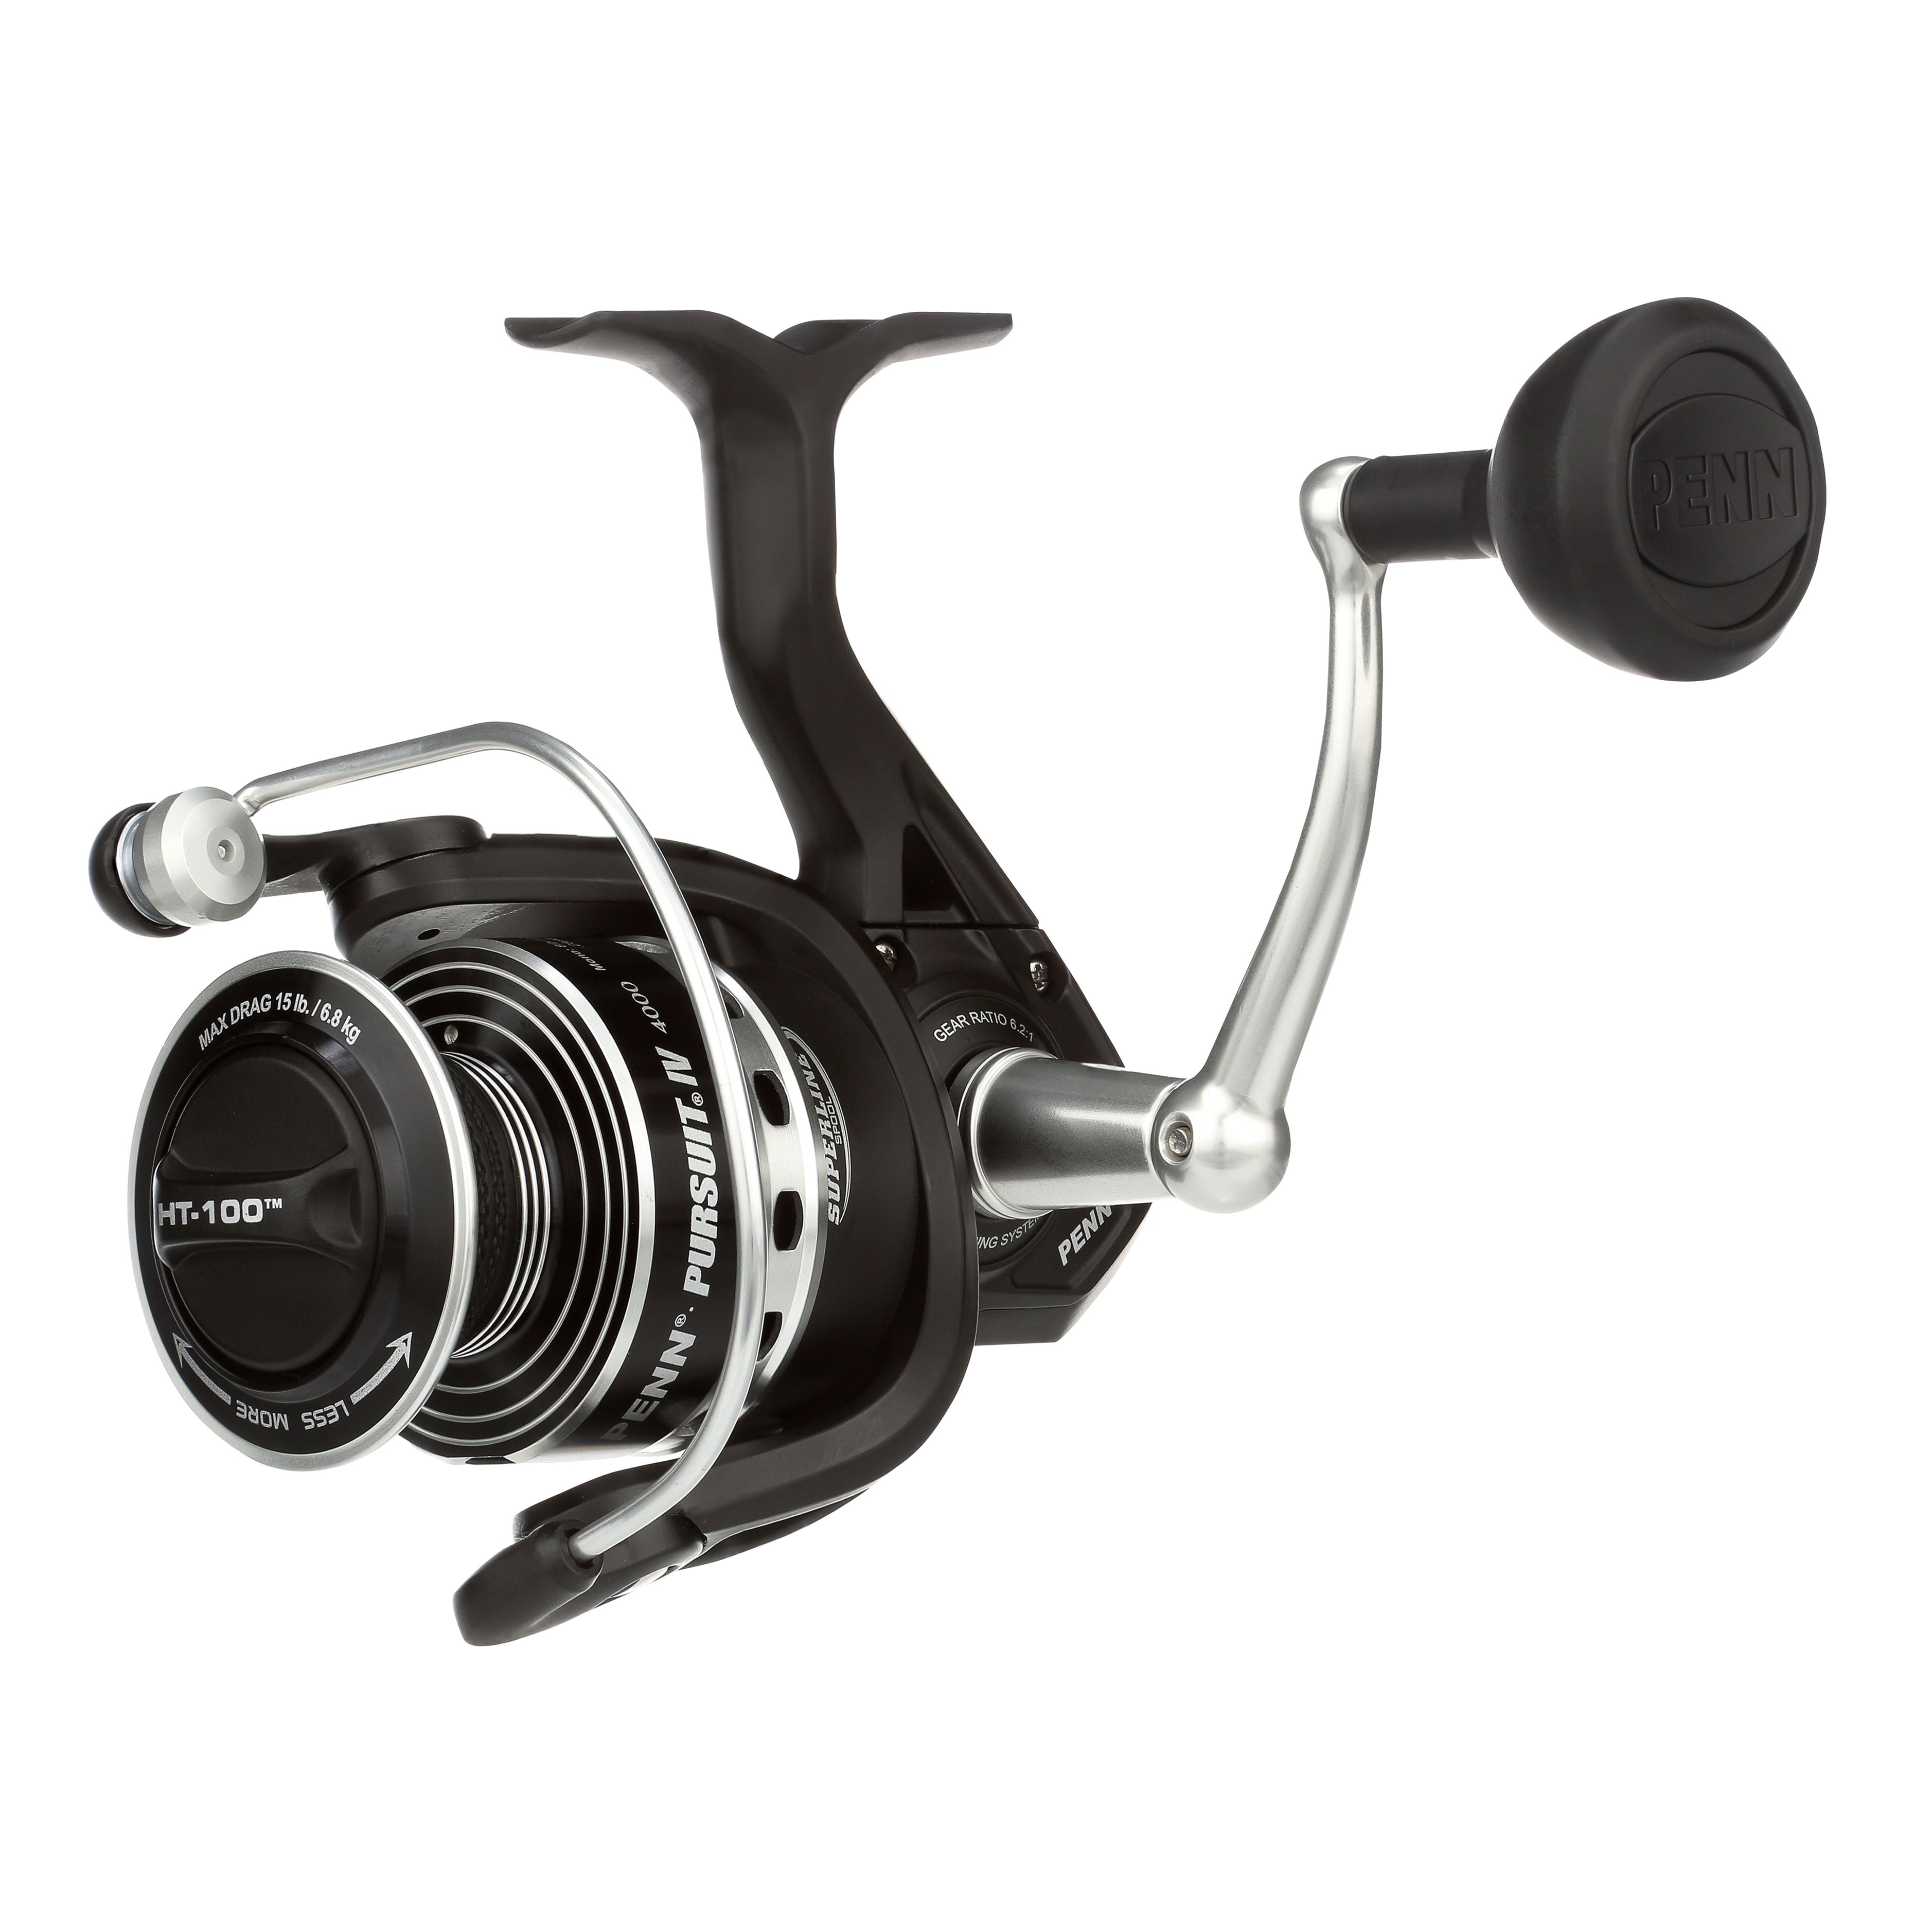 PENN Pursuit IV Spinning Reel Kit, Size 6000, Includes Reel Cover